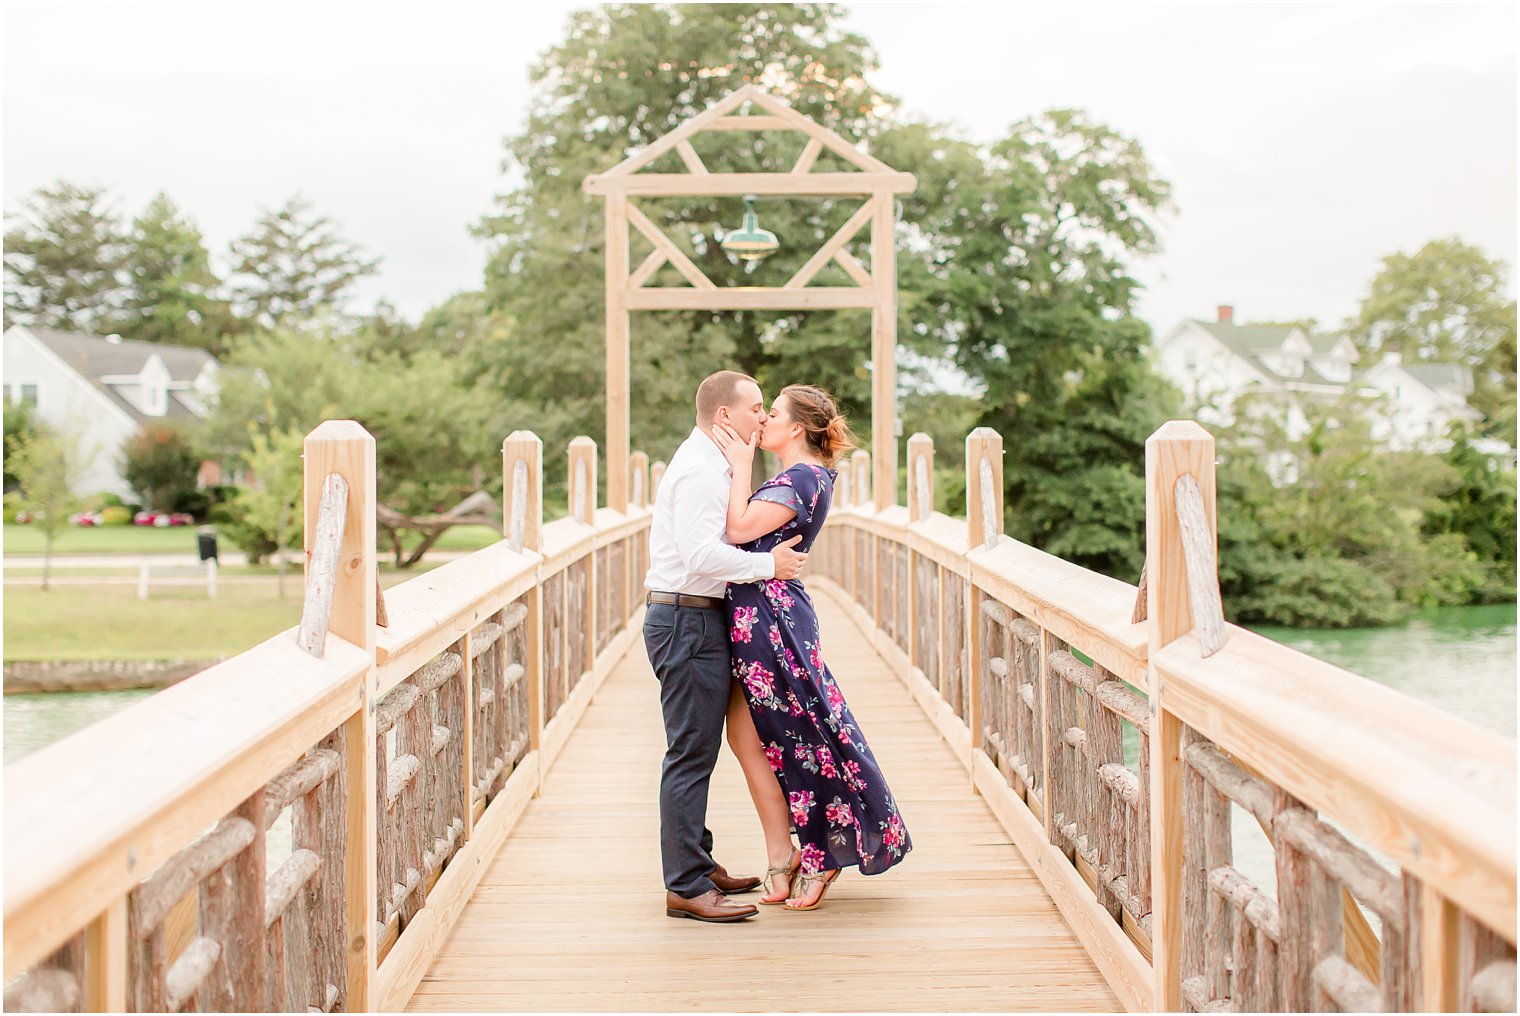 Where to take engagement photos in NJ